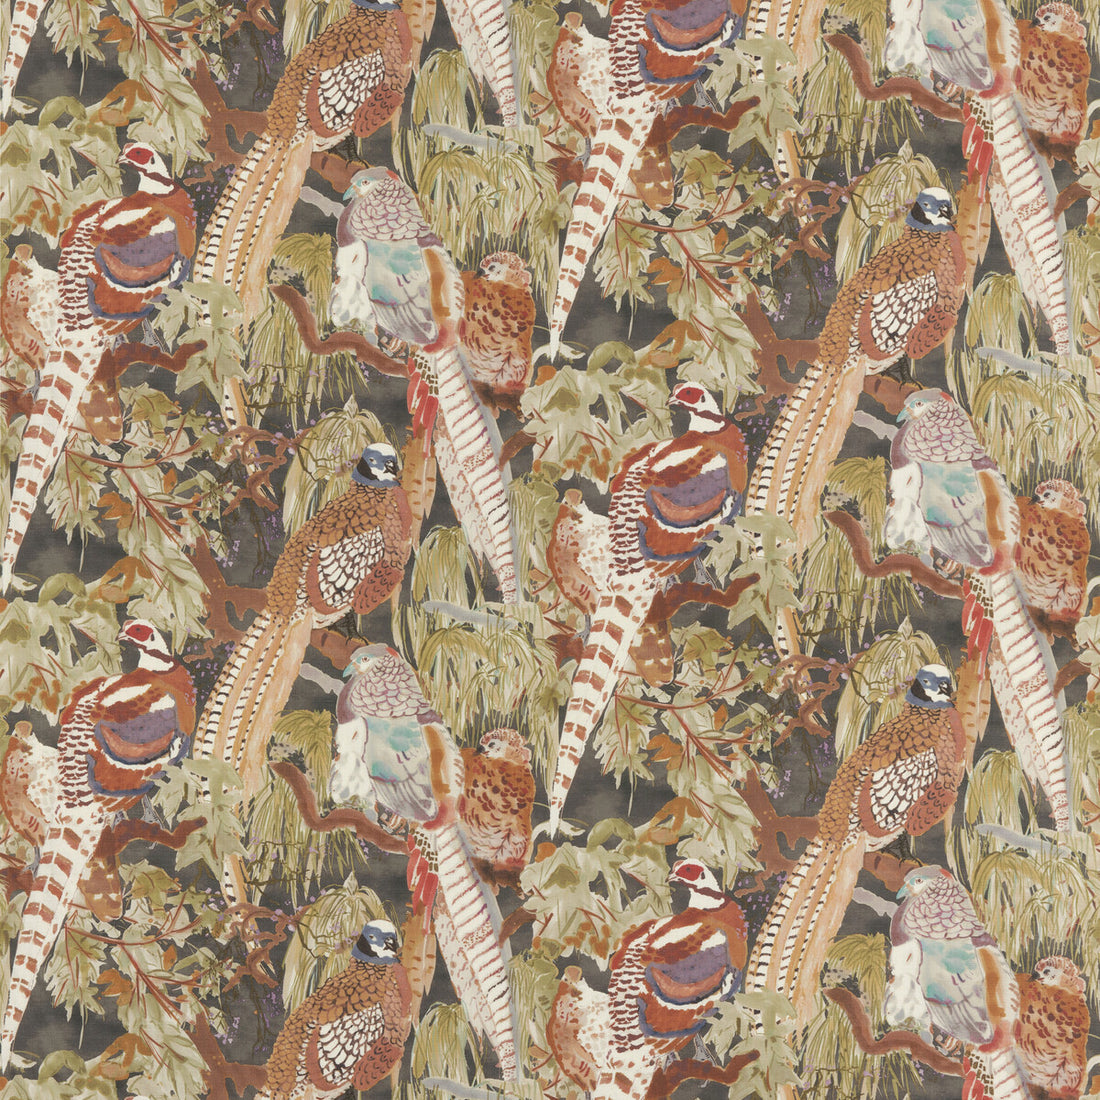 Game Birds Linen fabric in charcoal color - pattern FD305.A101.0 - by Mulberry in the Modern Country I collection